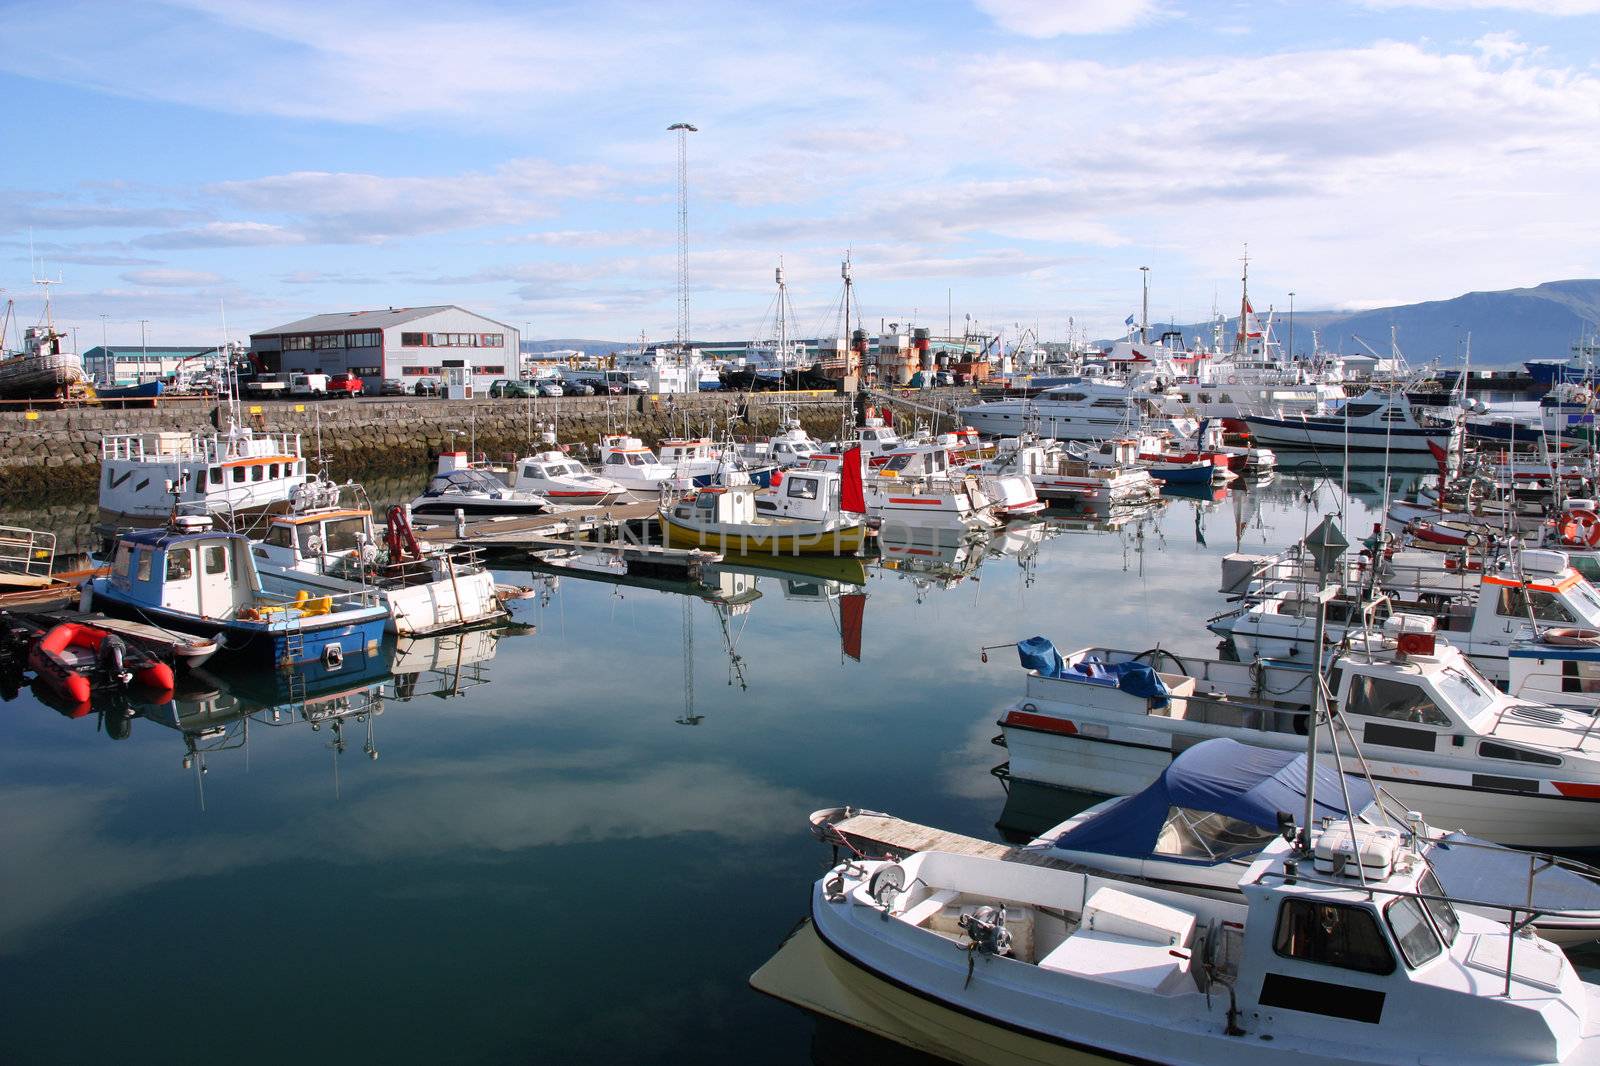 Reykjavik harbor. Motorboats, yachts and small fishing ships. All brand names and registration numbers removed.